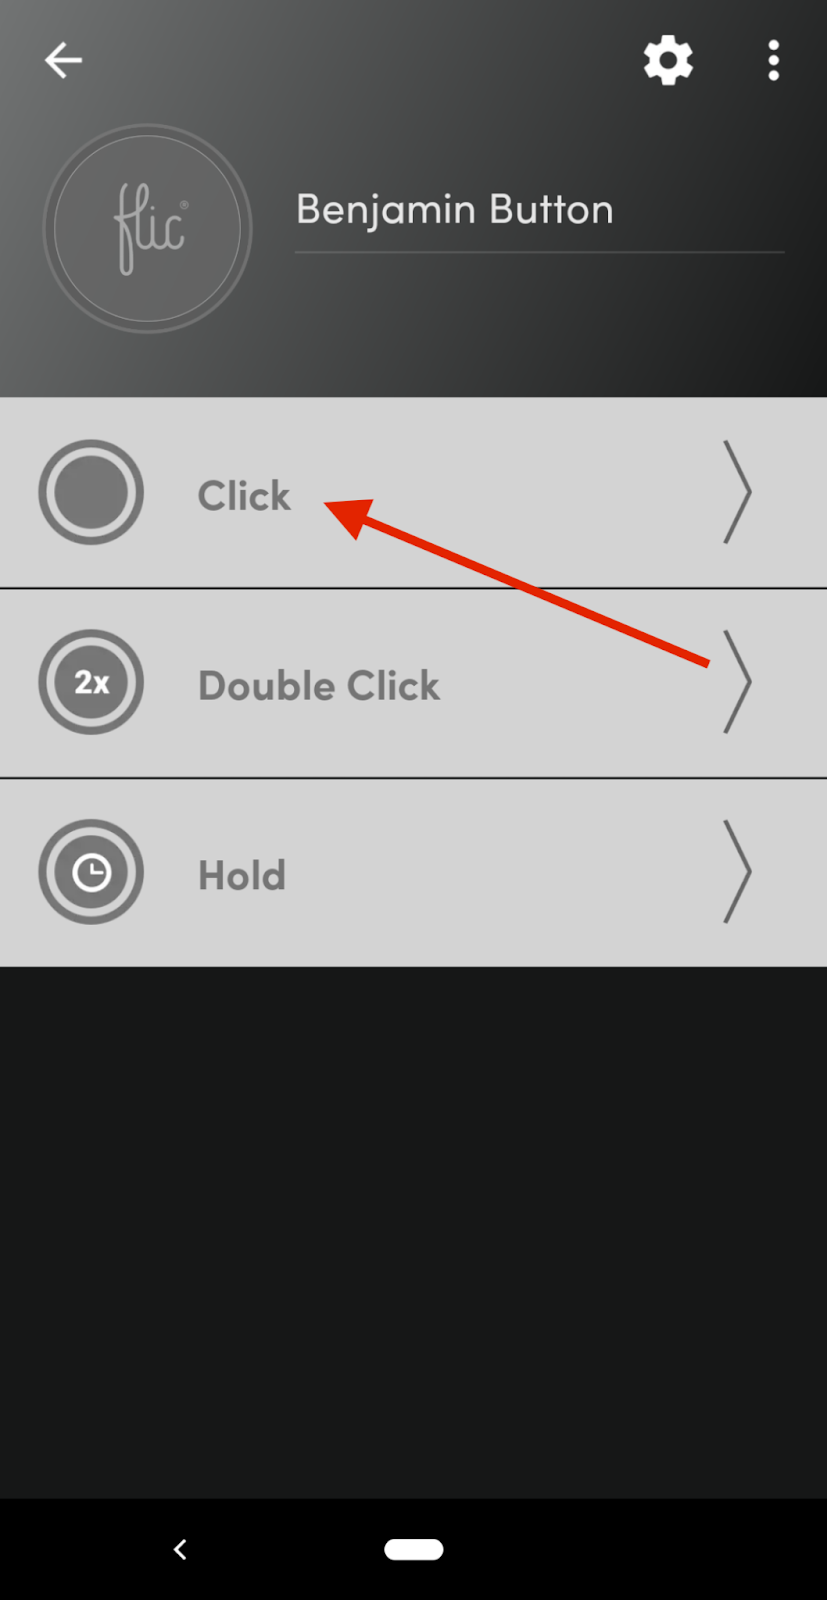 Buttons actions list in the Flic button app